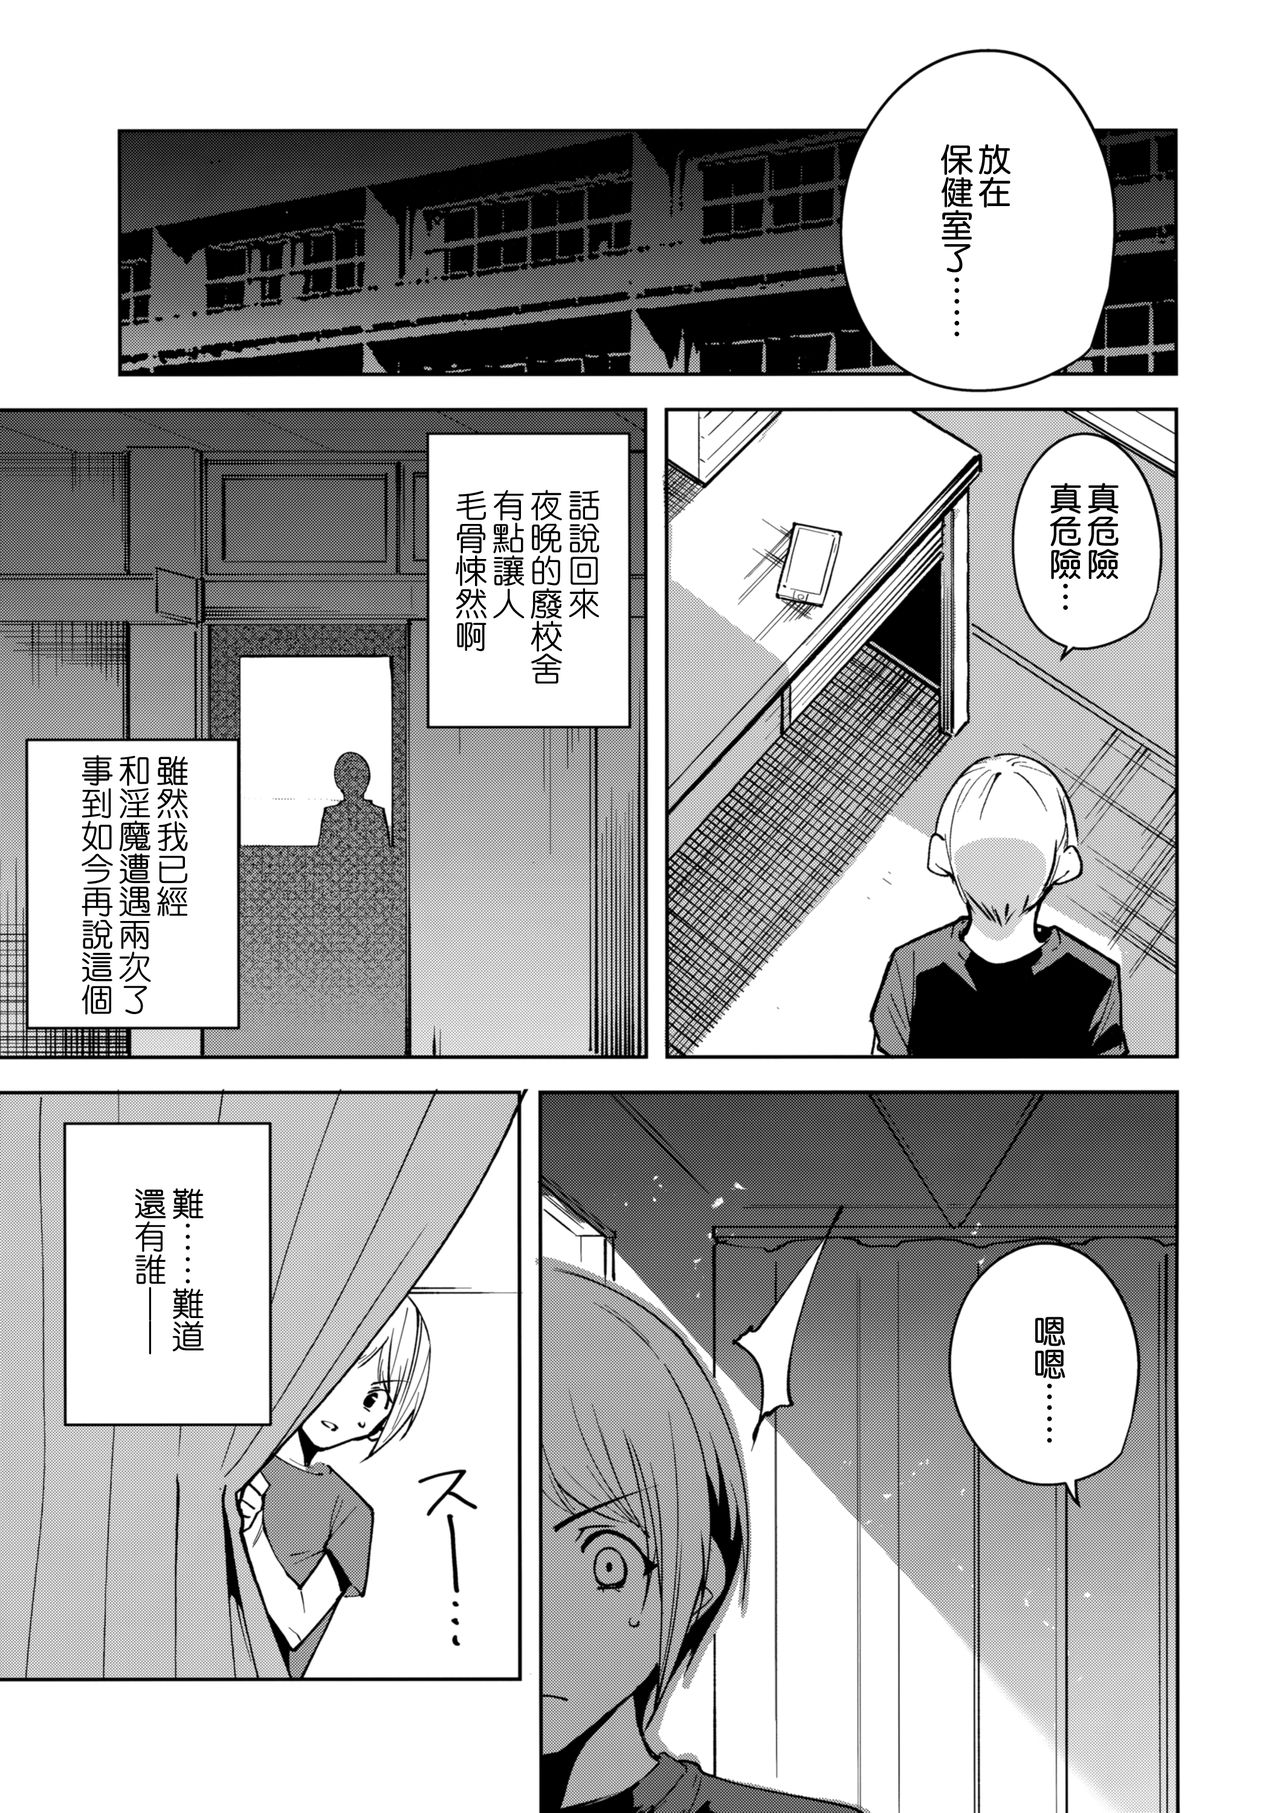 (C95) [Ink Complex (Tomohiro Kai)] Commons no Ma 3 [Chinese]  [無邪気漢化組] page 13 full